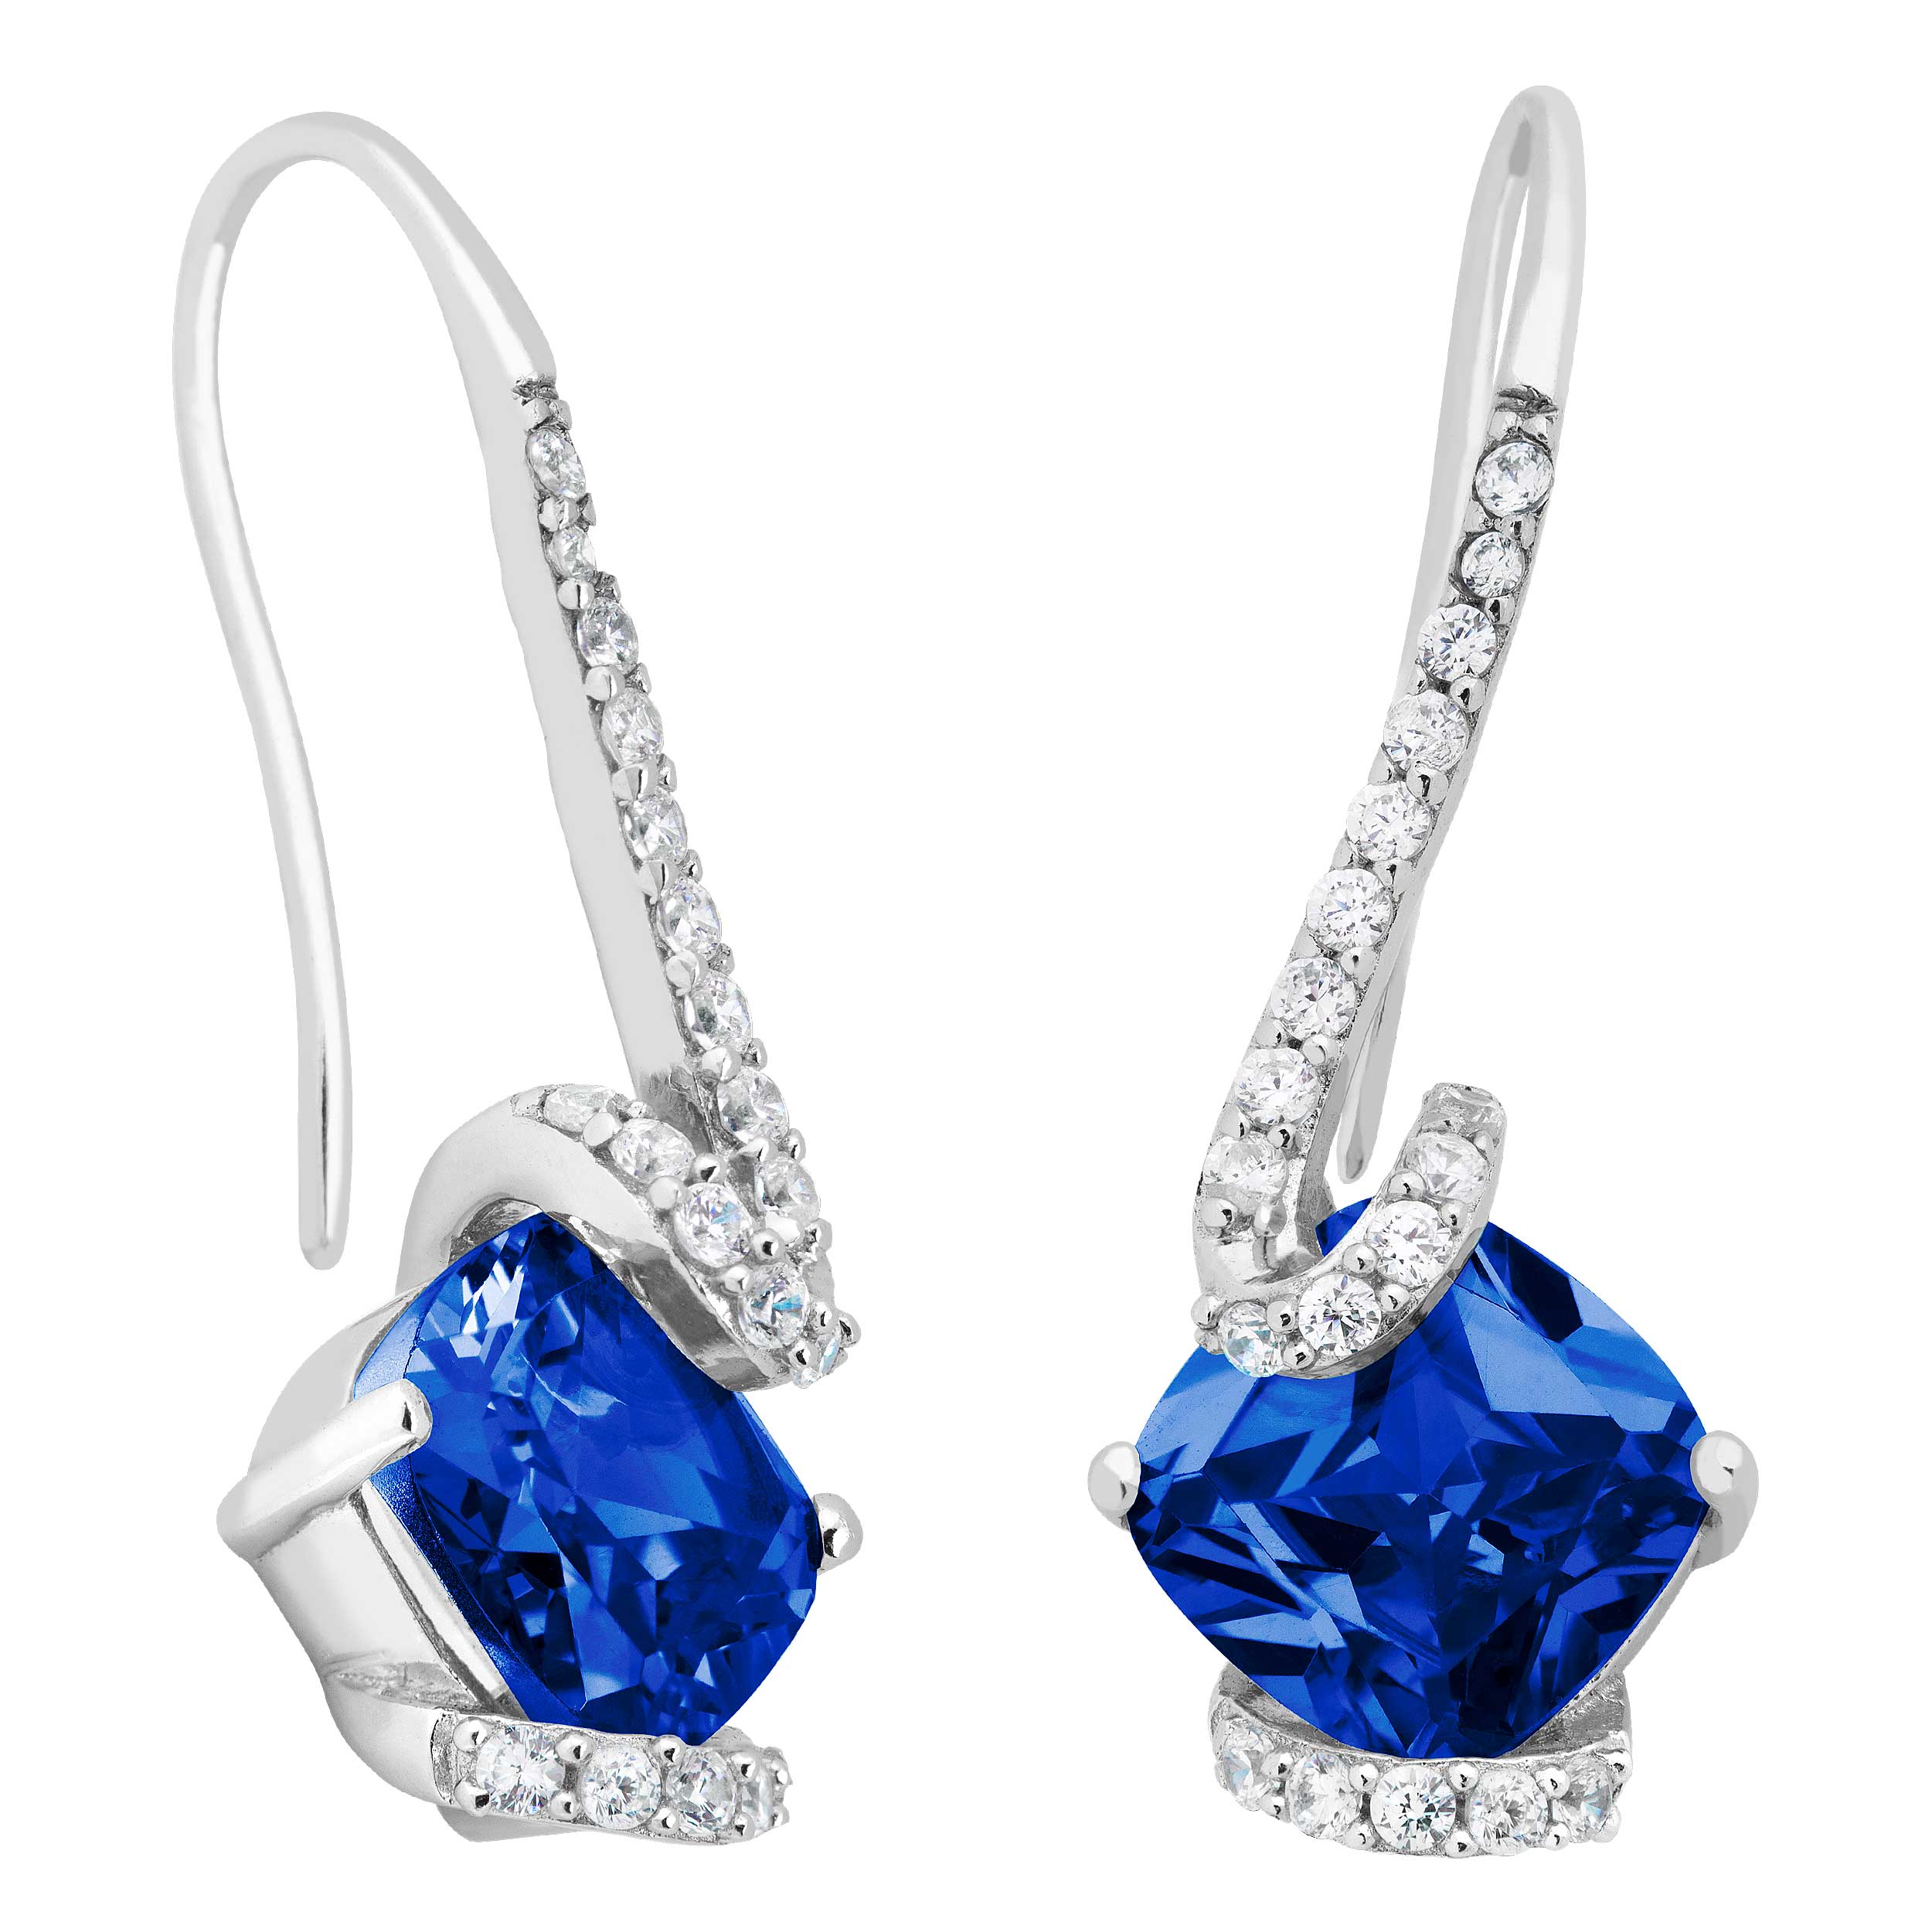 Cushion-Cut Created Blue Sapphire and White Topaz Earrings, Rhodium Plated Sterling Silver